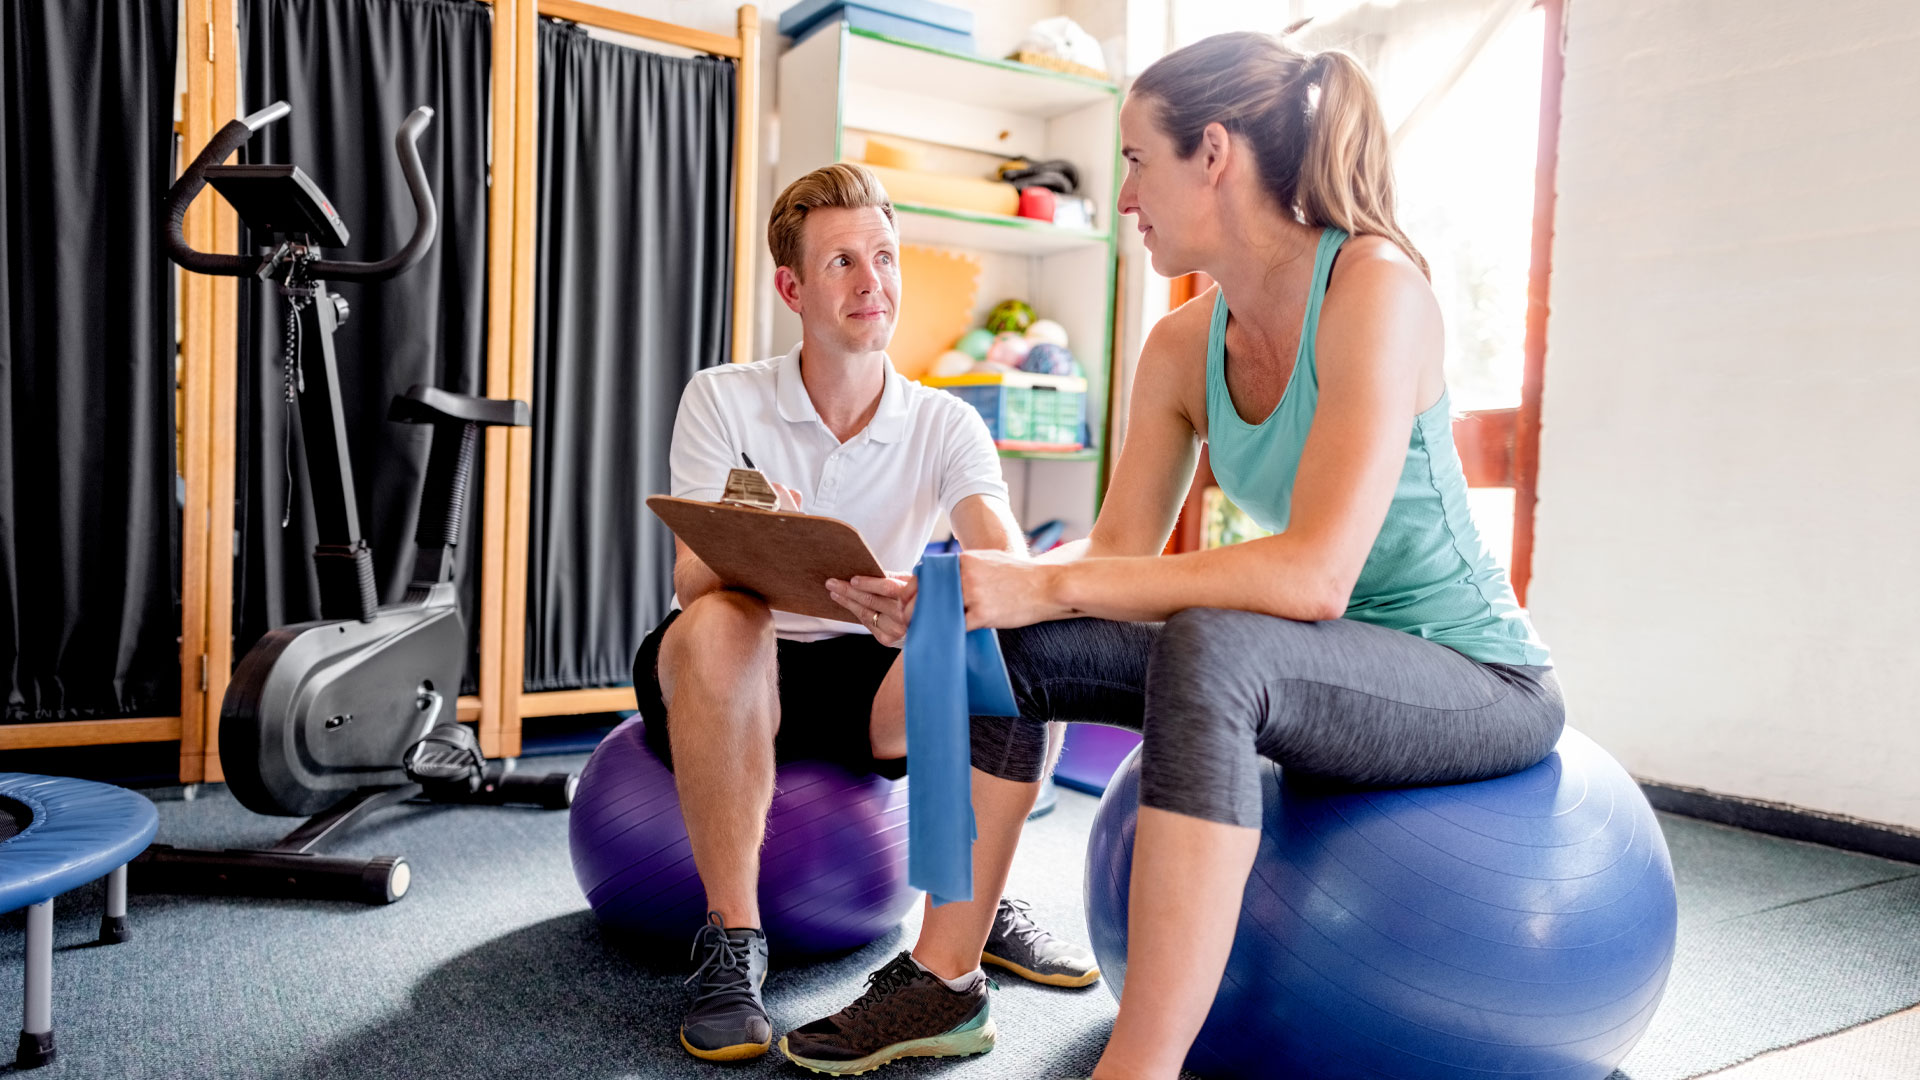 Physiotherapist sitting on a swiss ball with a client and discussing her treatment requirements.